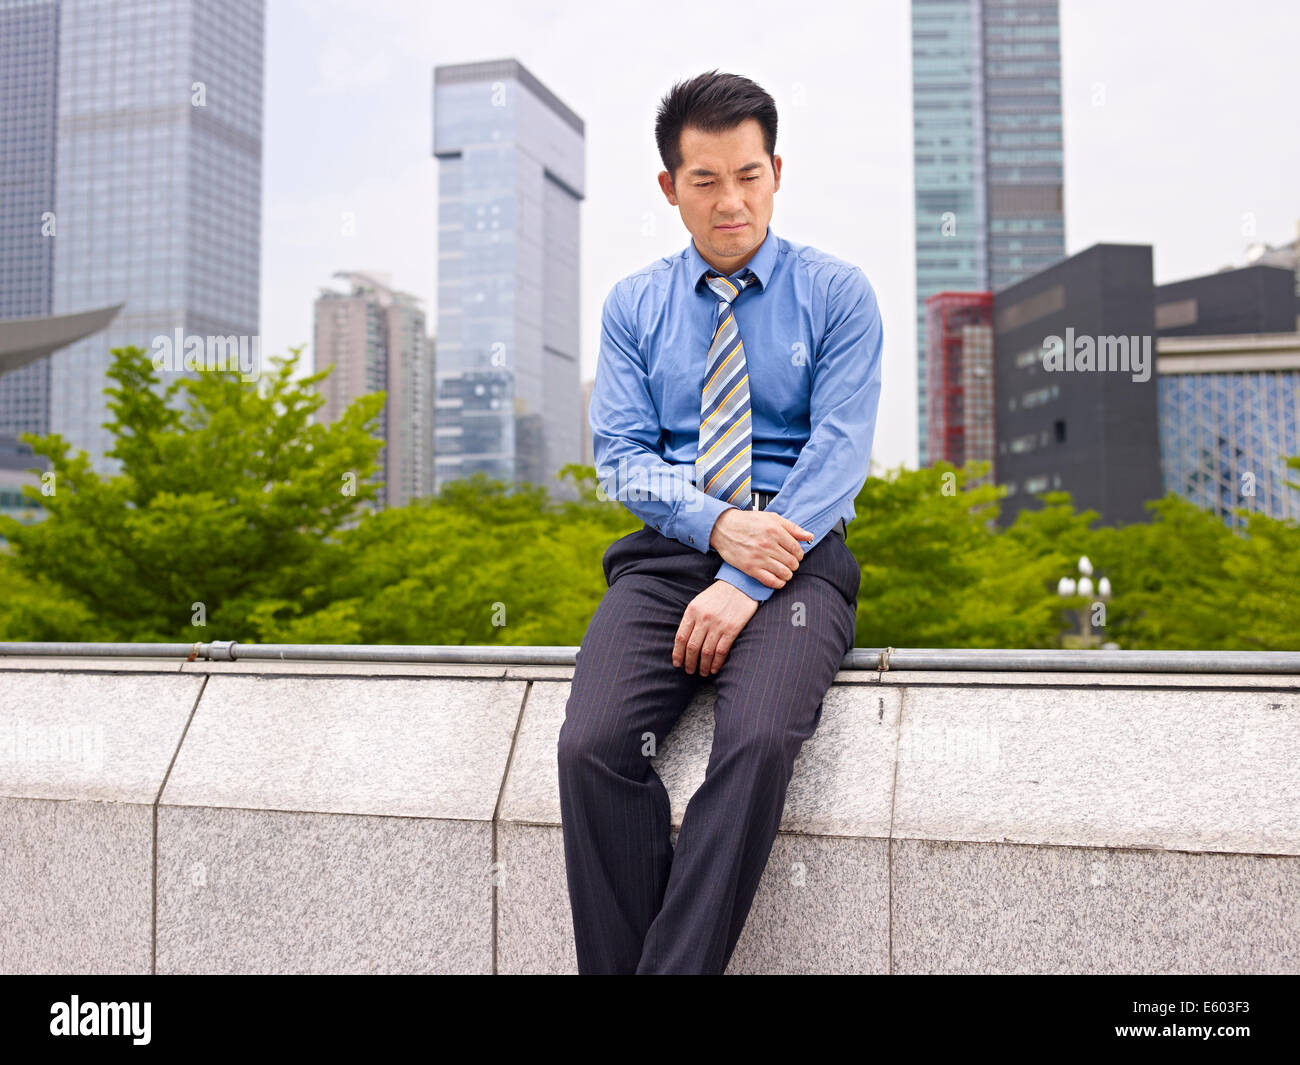 frustrated businessman Stock Photo